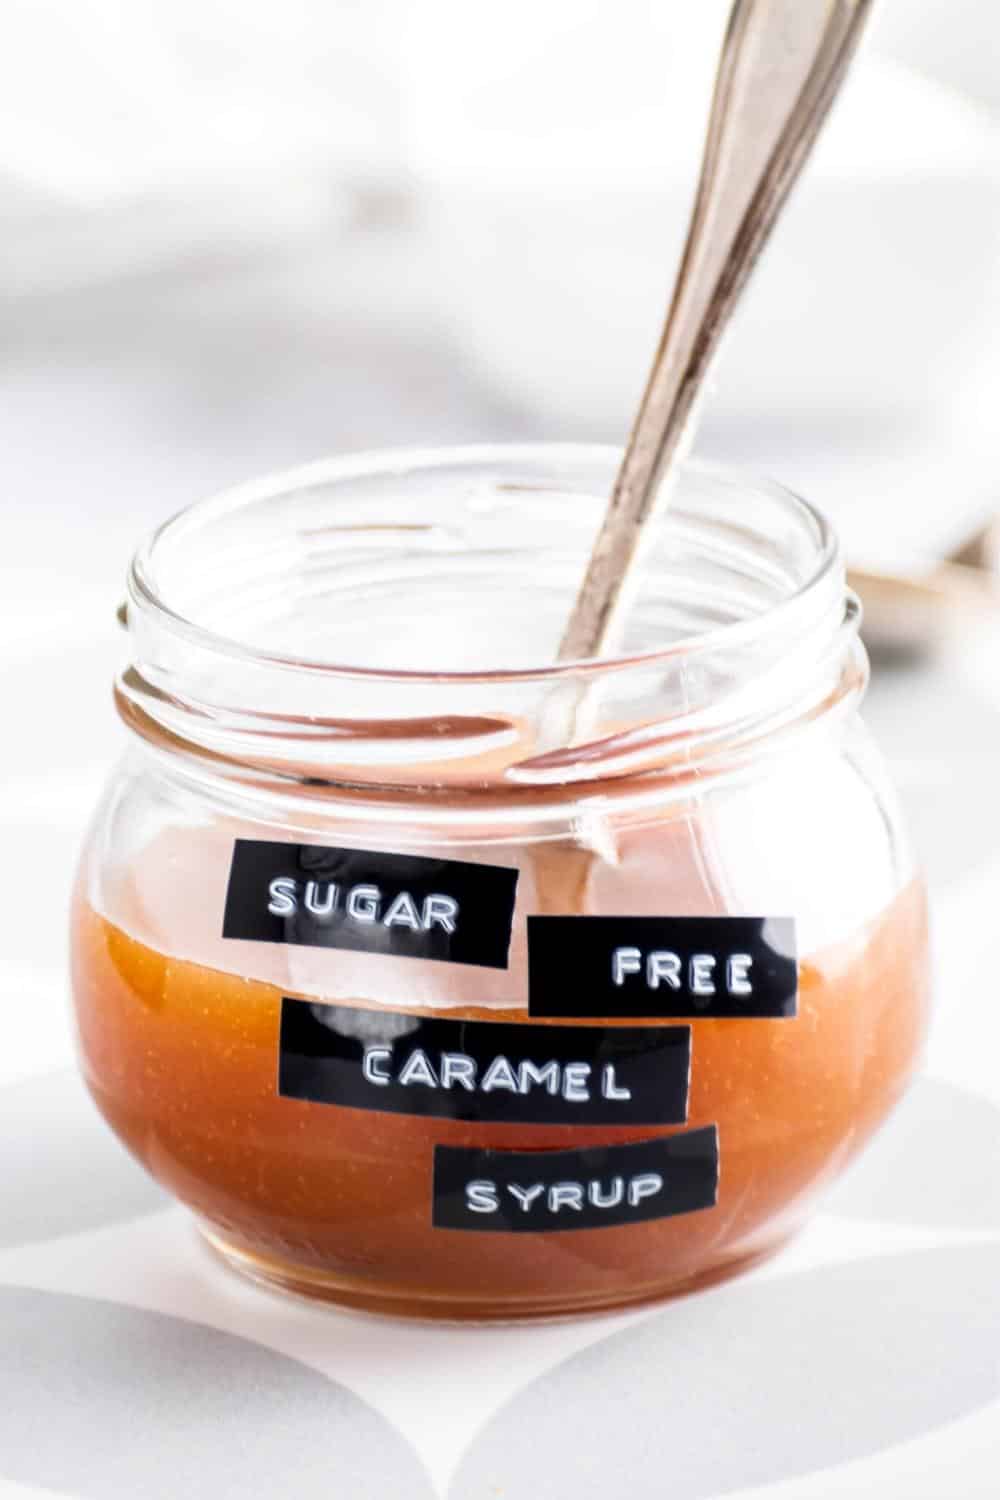 A spoon and a glass jar that is halfway filled with caramel sauce.